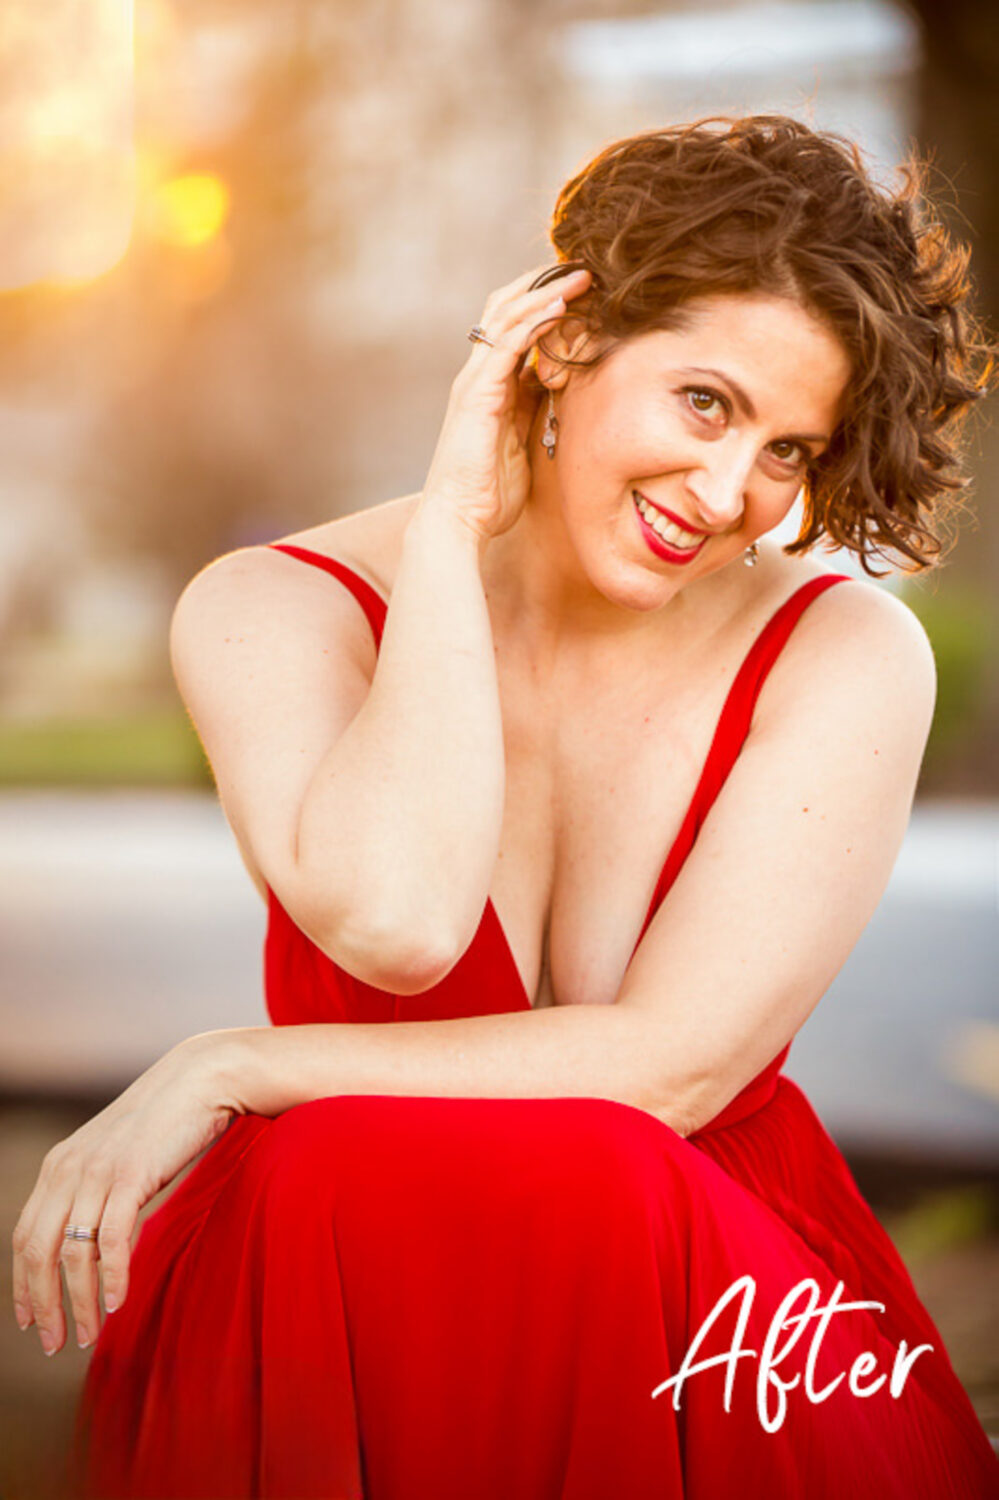 vibrant, colorful image of this opera singer's new headshots during this creative branding session